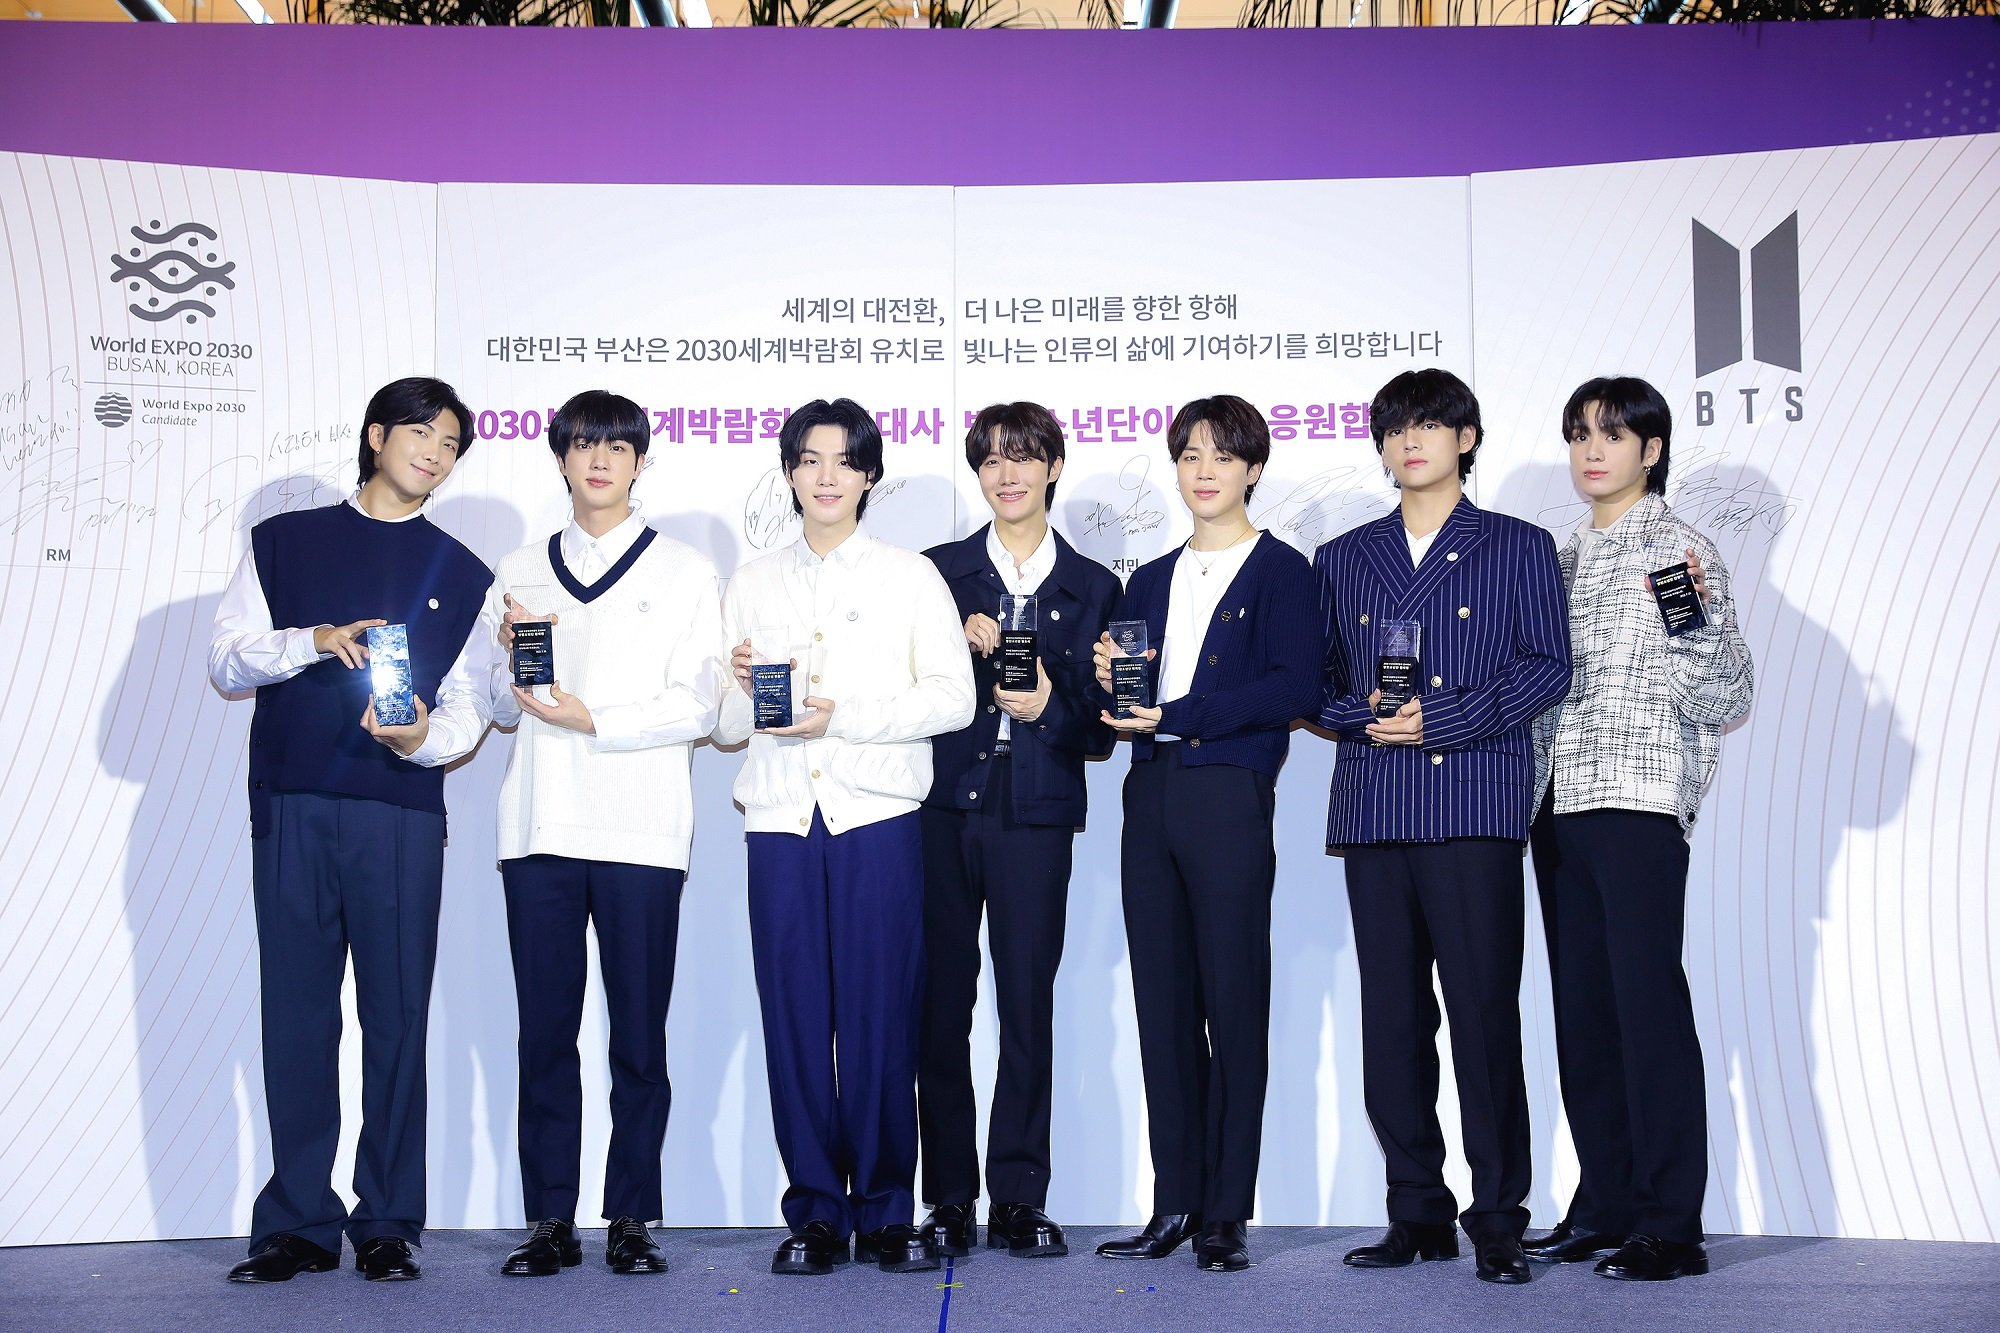 RM, Jin, Suga, J-Hope, Jimin, V, and Jungkook of BTS at the World Expo 2030 Busan, Korea appointment ceremony